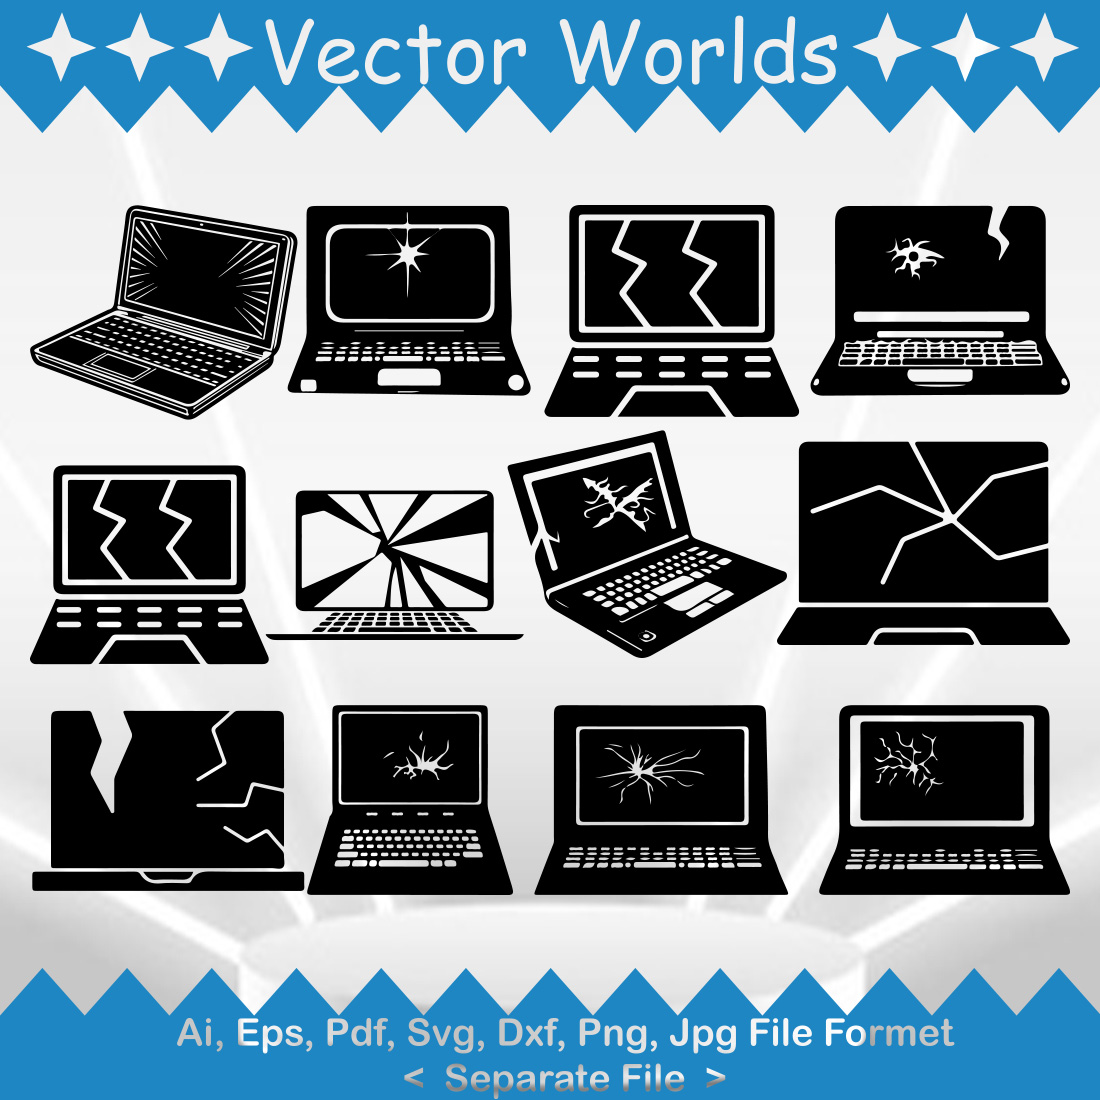 Cracked Laptop SVG Vector Design cover image.